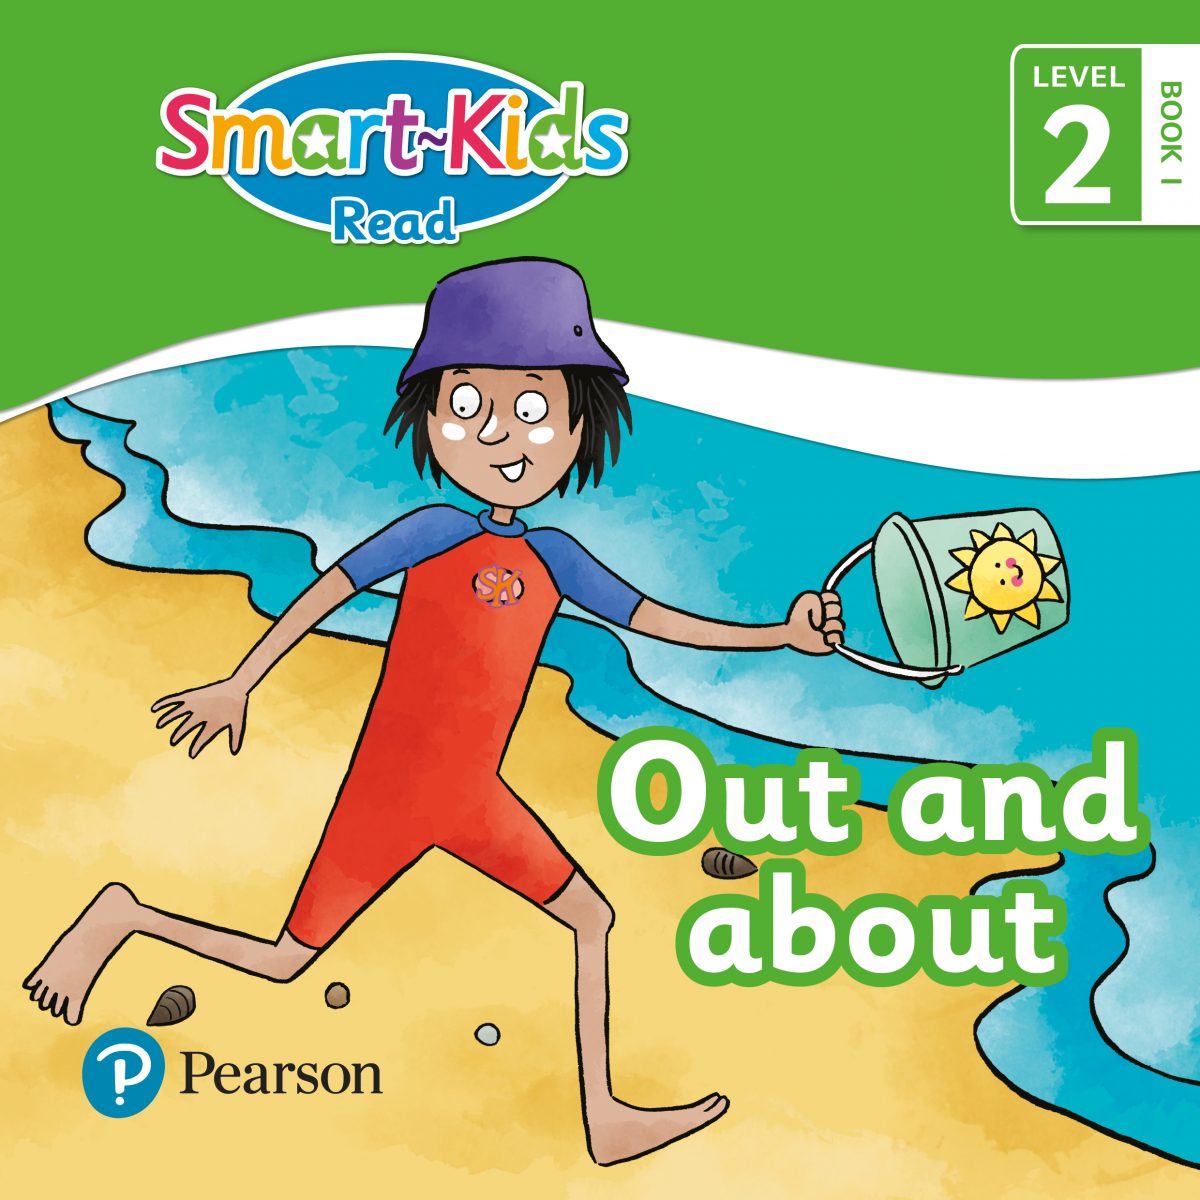 Smart-Kids Read! Level 2 Book 1: Out & about